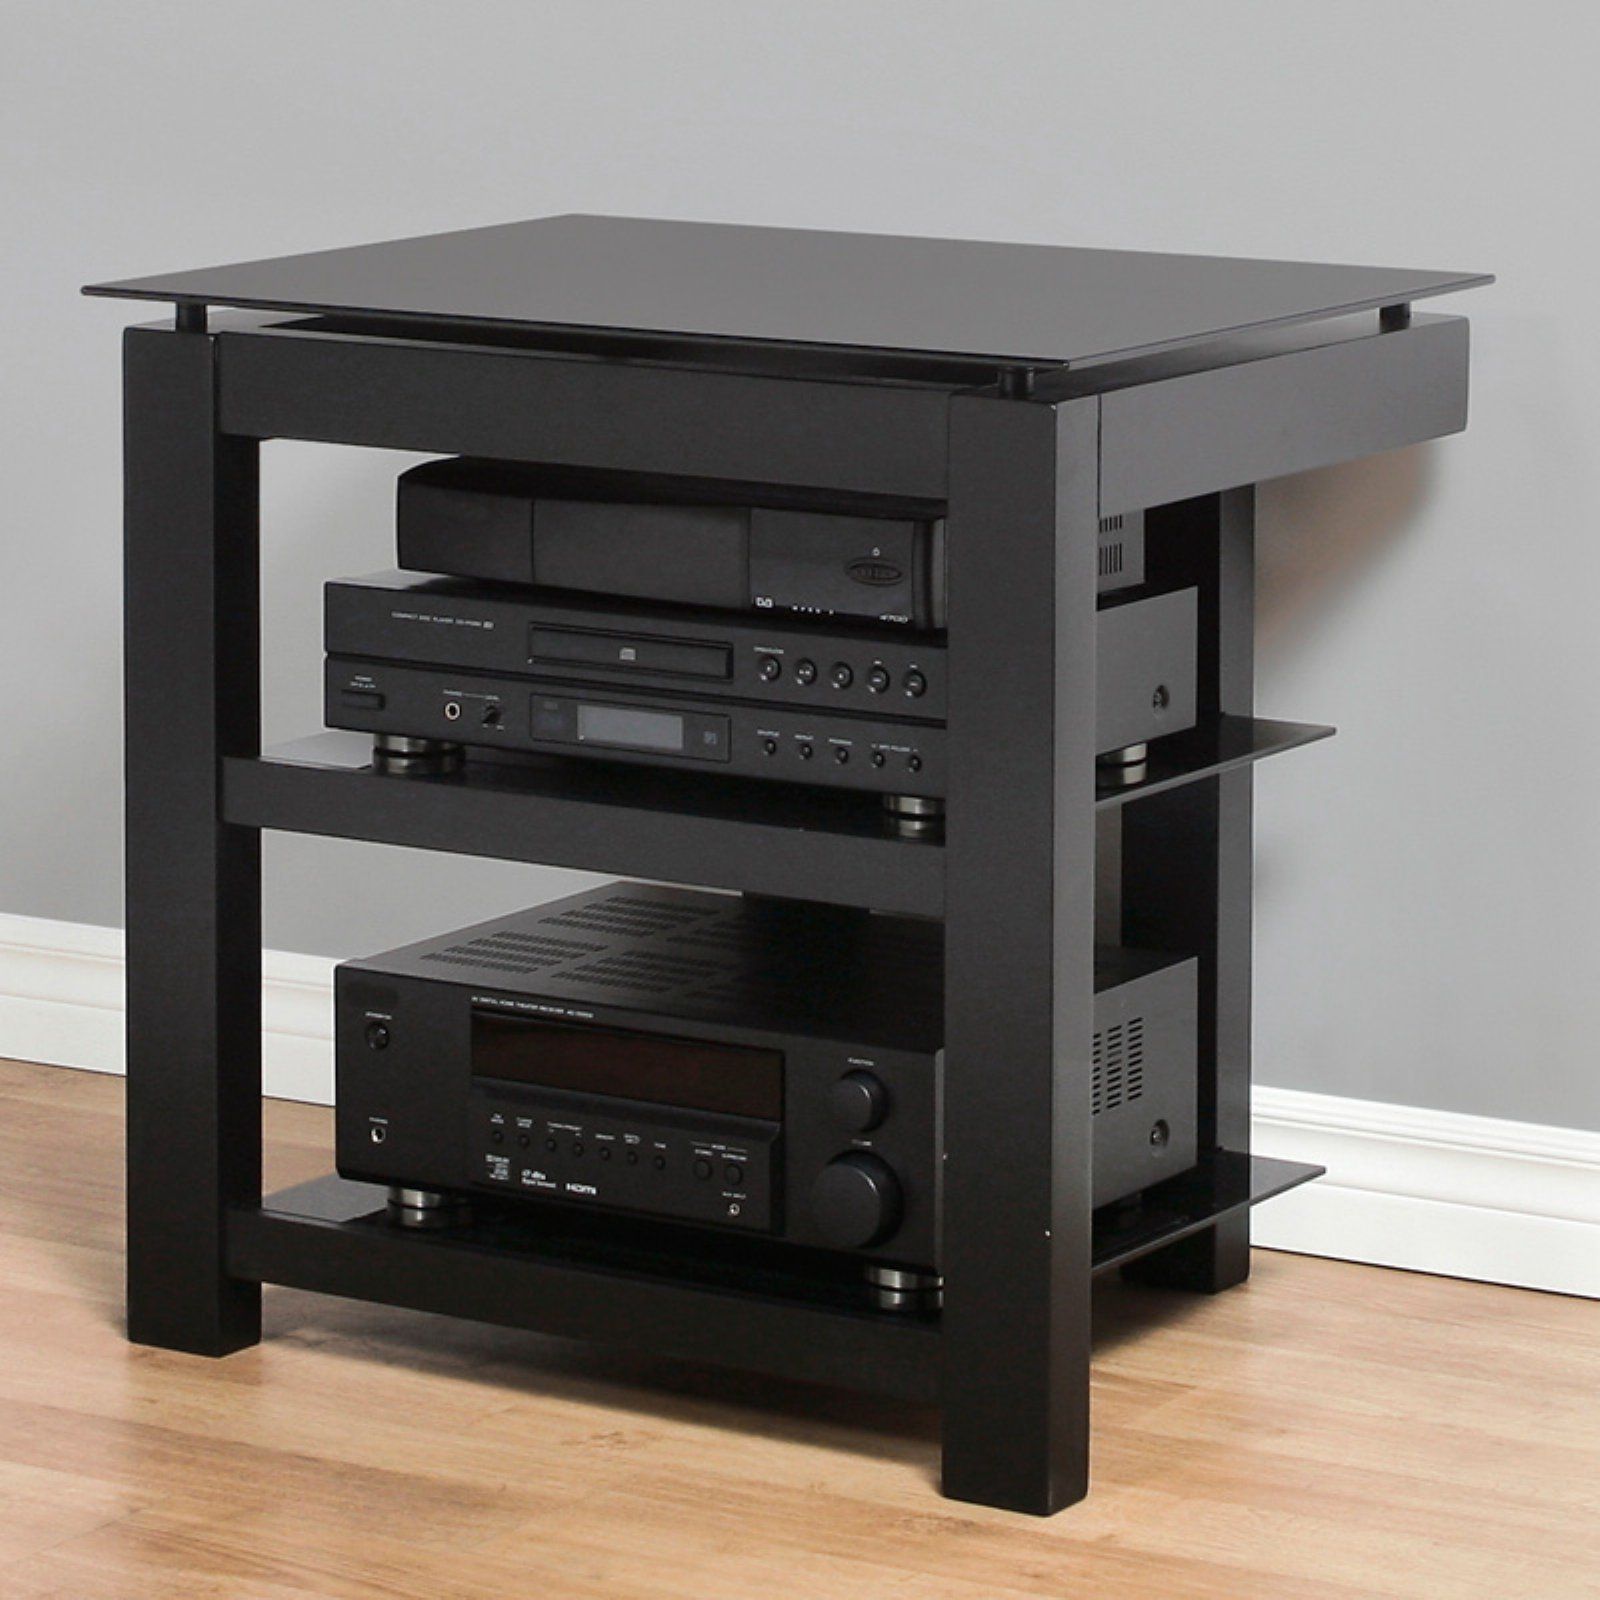 26 Inch Flat Screen Low Profile Tv Stand – Black Glass And Intended For Black Glass Tv Stands (Photo 9 of 15)